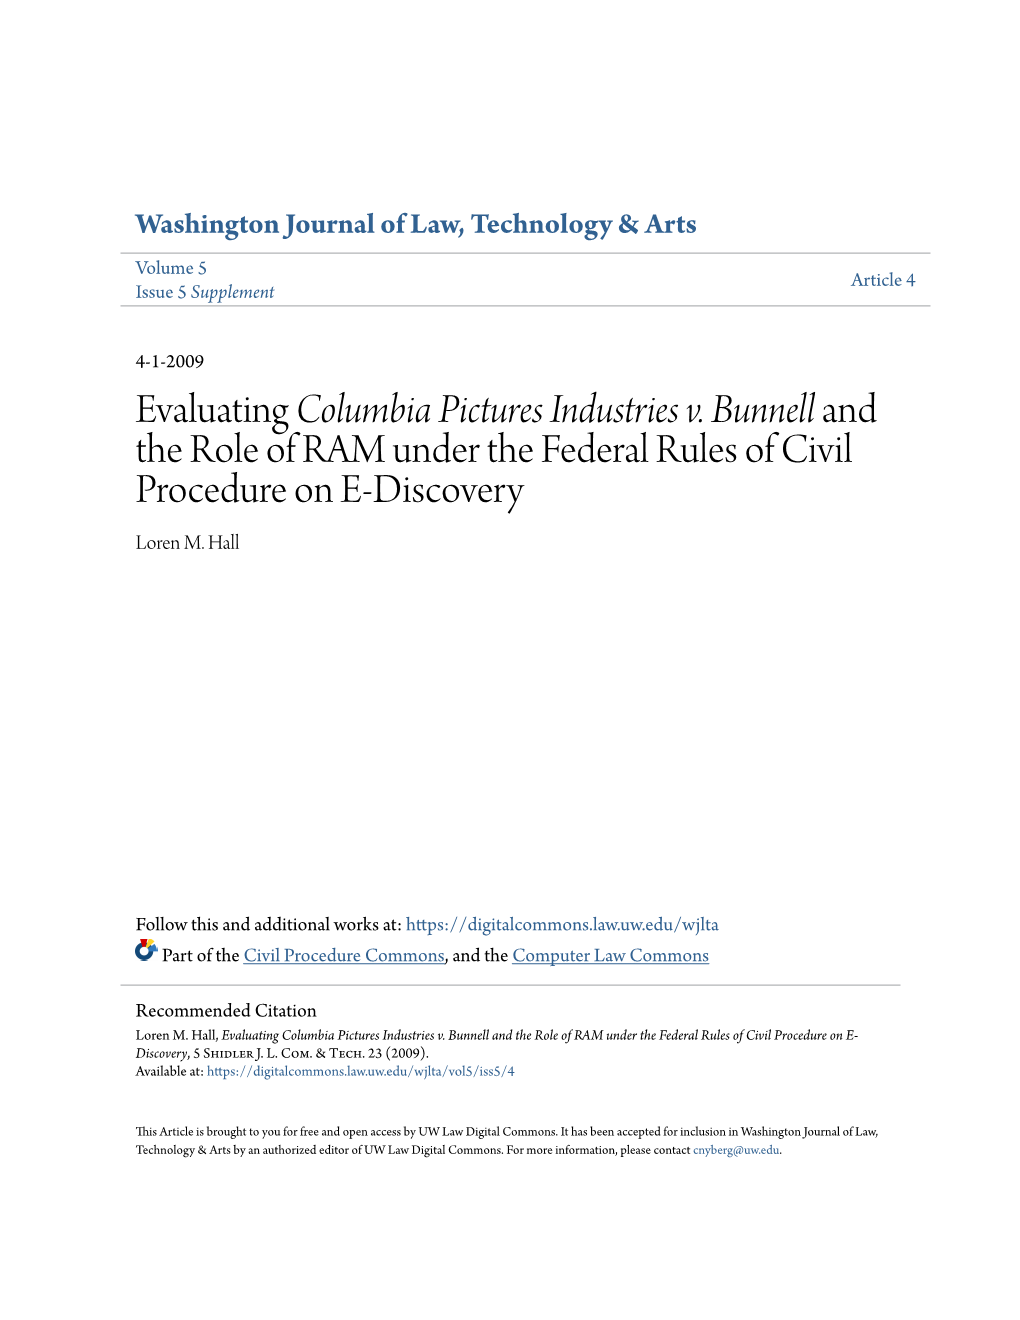 Evaluating Columbia Pictures Industries V. Bunnell and the Role of RAM Under the Federal Rules of Civil Procedure on E-Discovery Loren M